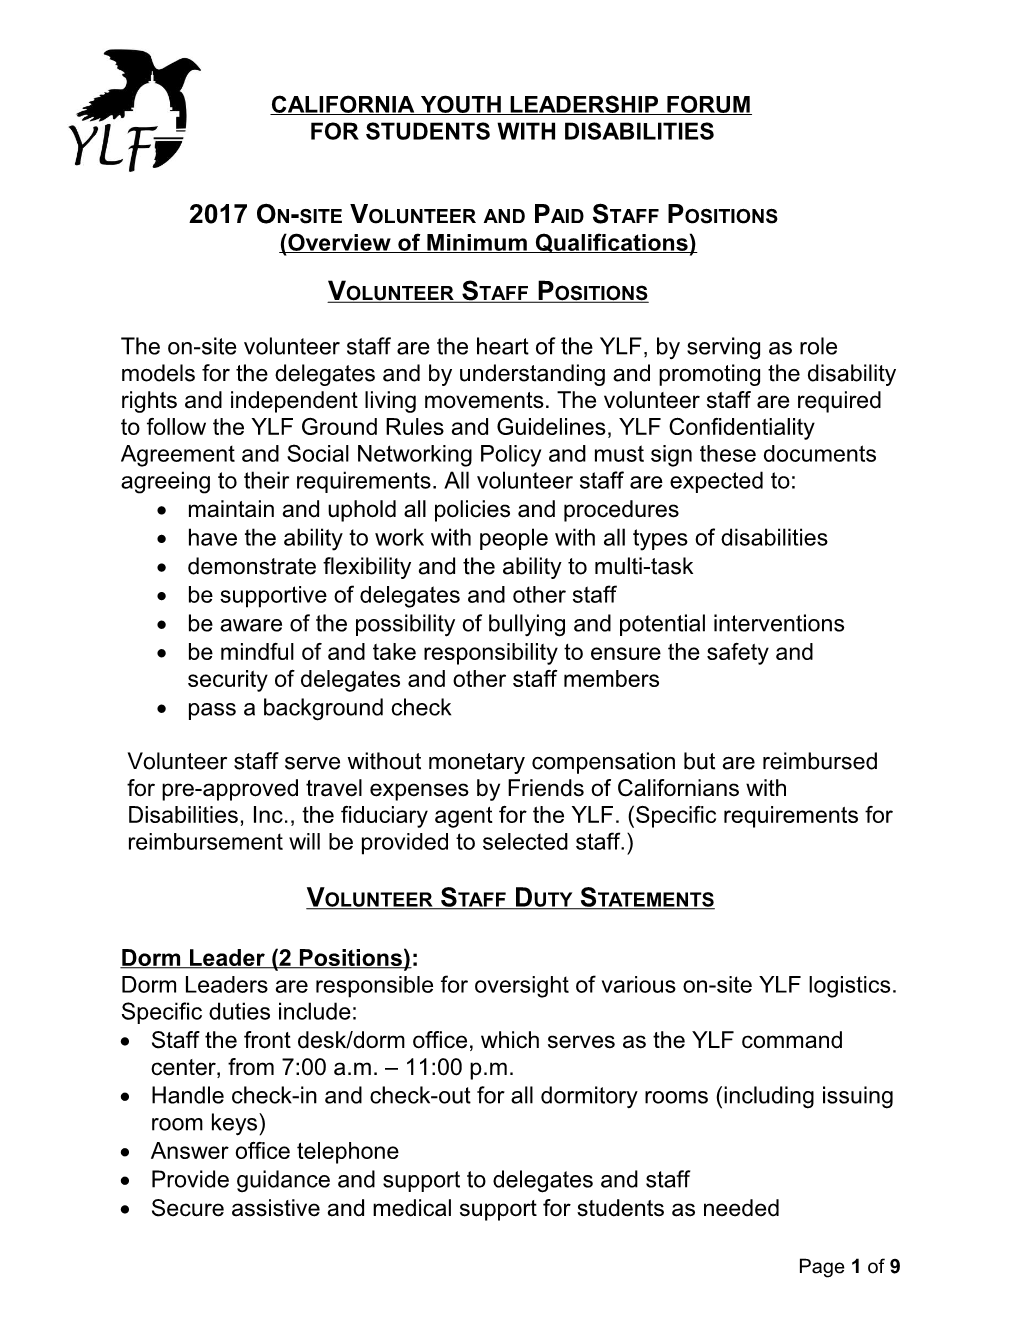 2017On-Site Volunteer and Paid Staff Positions